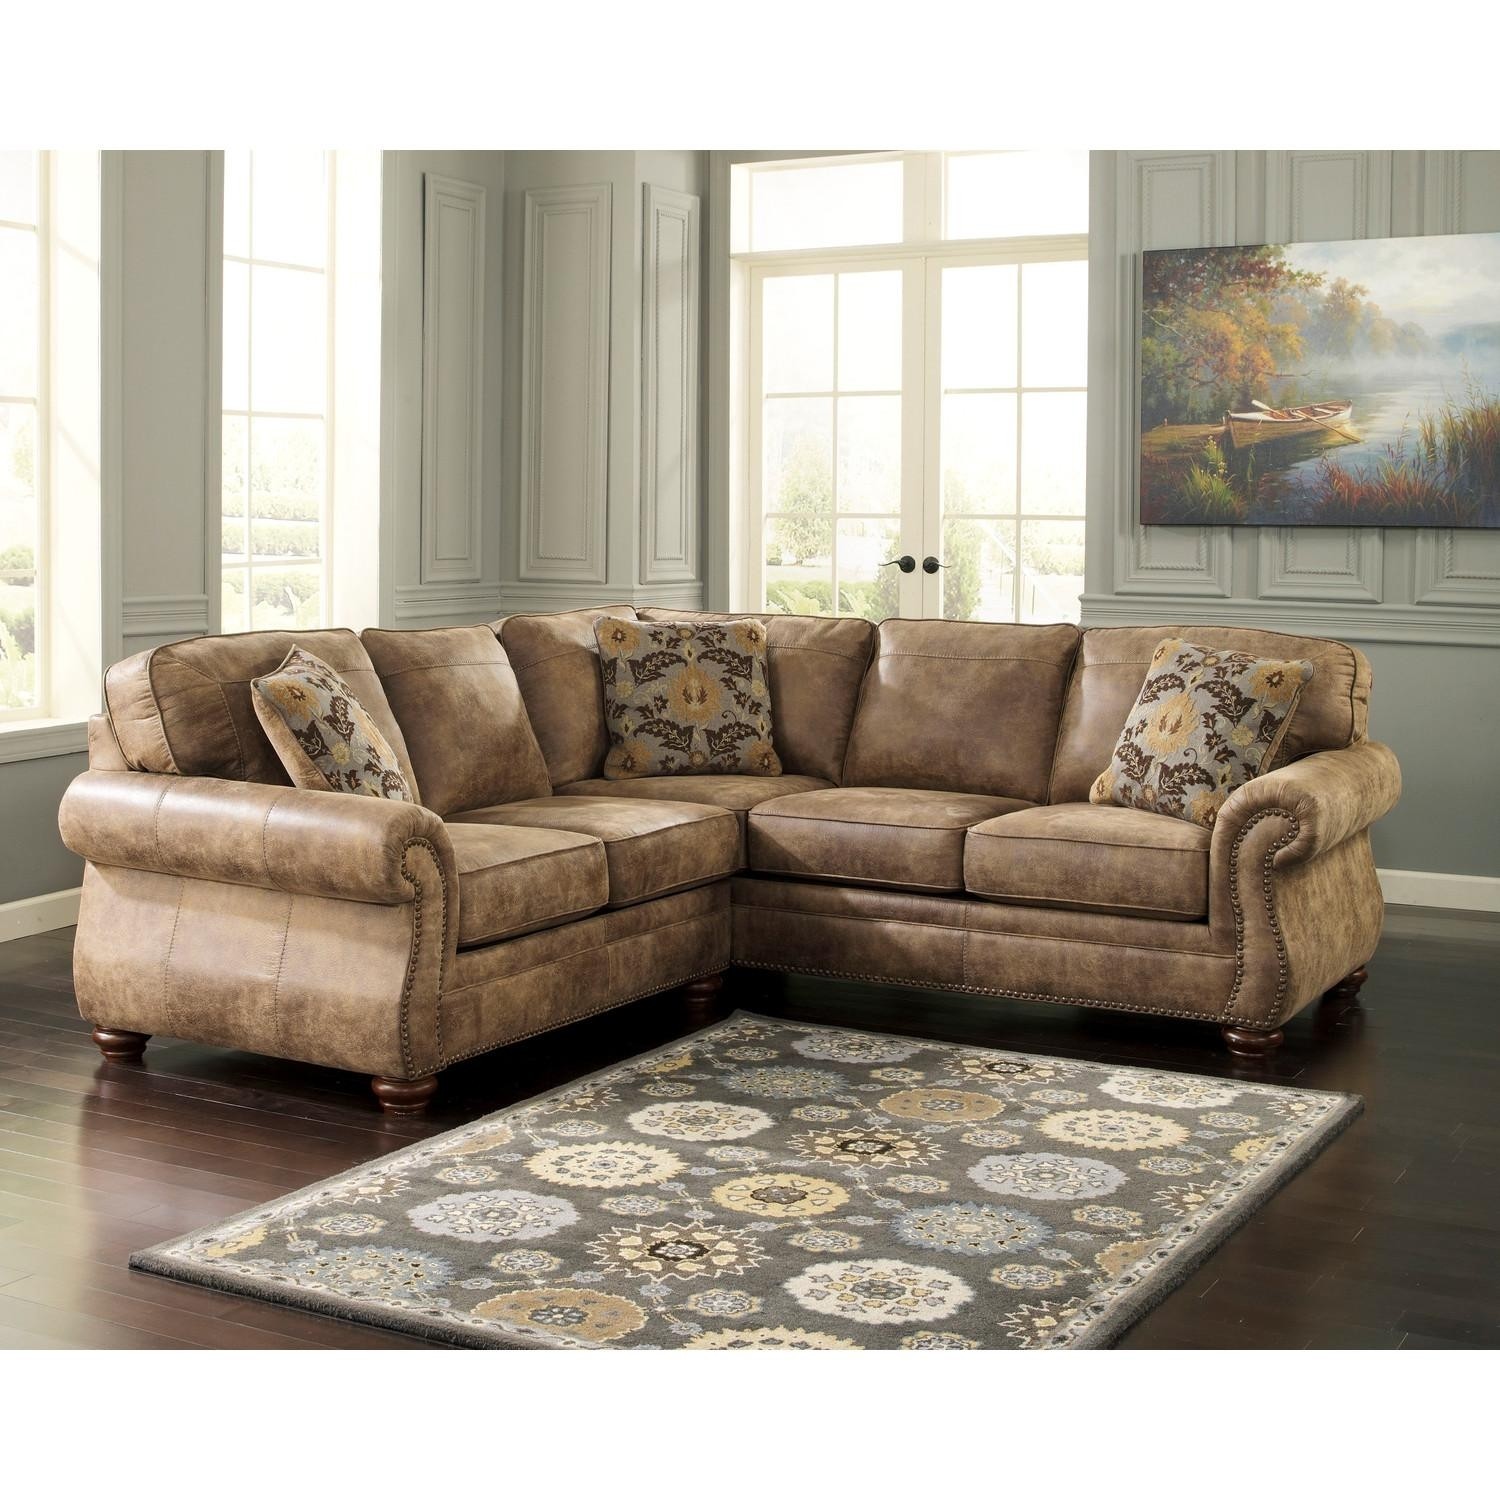 20 choices of small scale sectional sofas sofa ideas 4